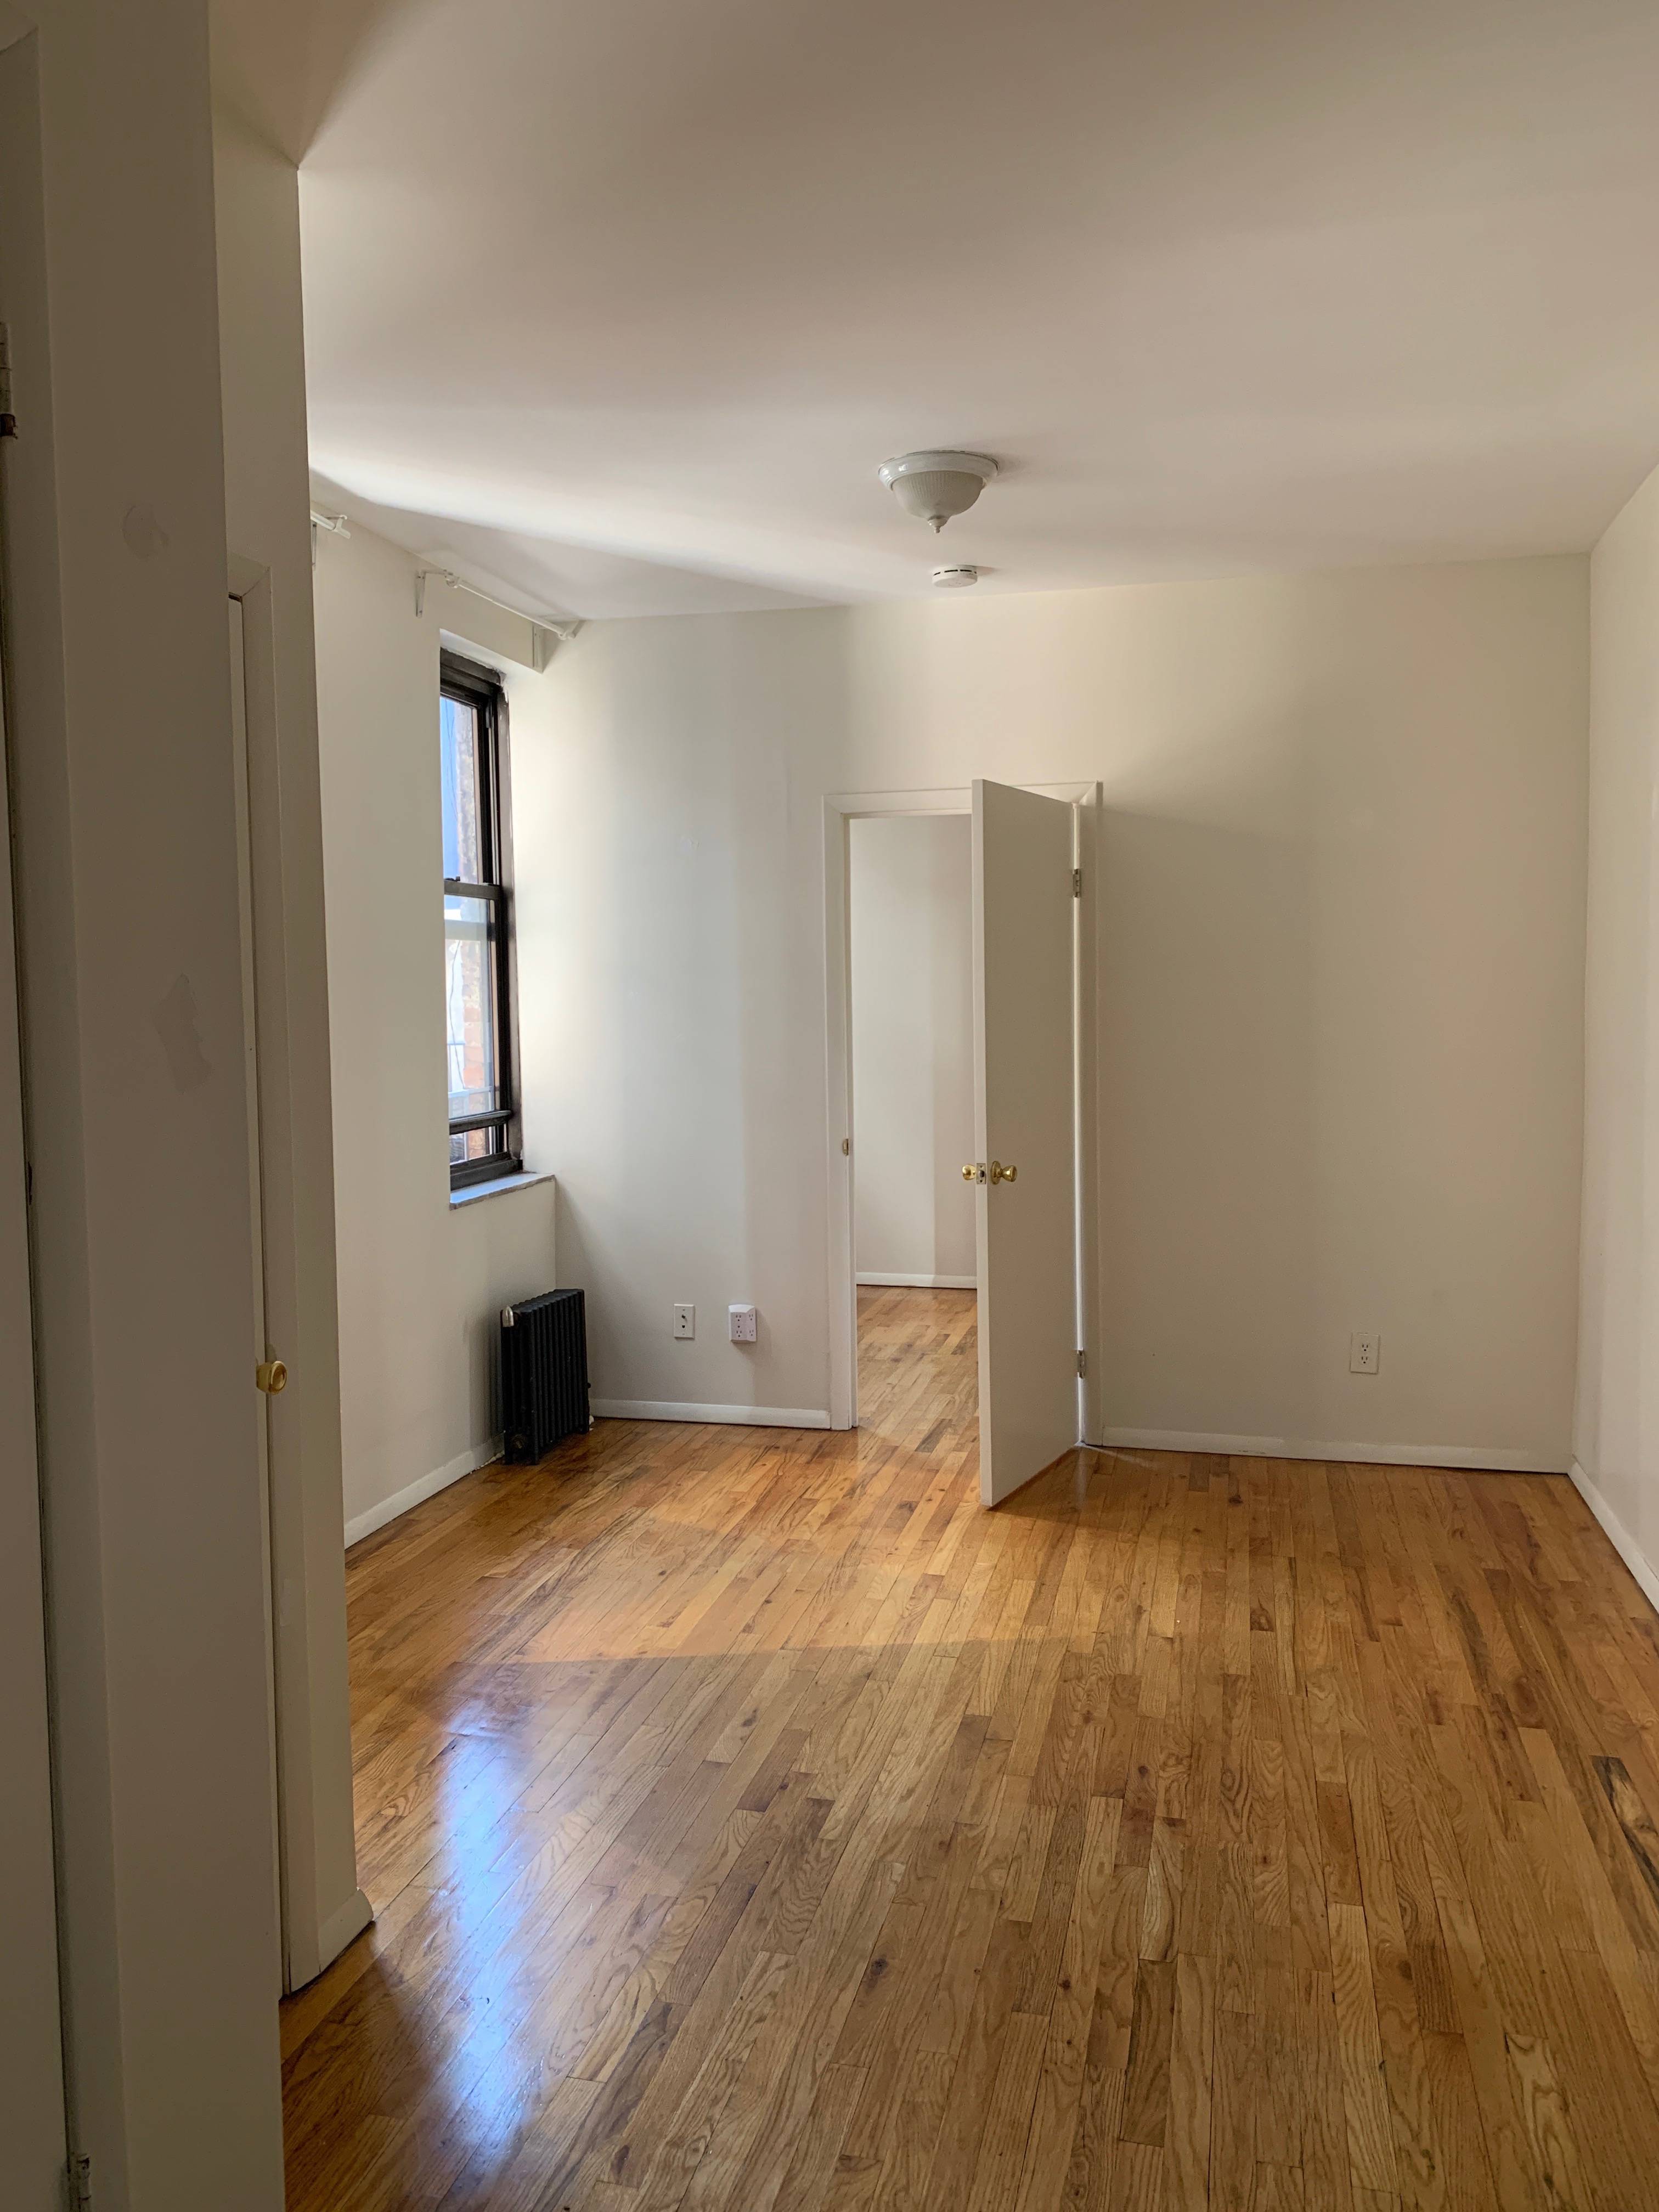 Newly Renovated 1 Bedroom Apartment in the Heart of Greenwich Village.